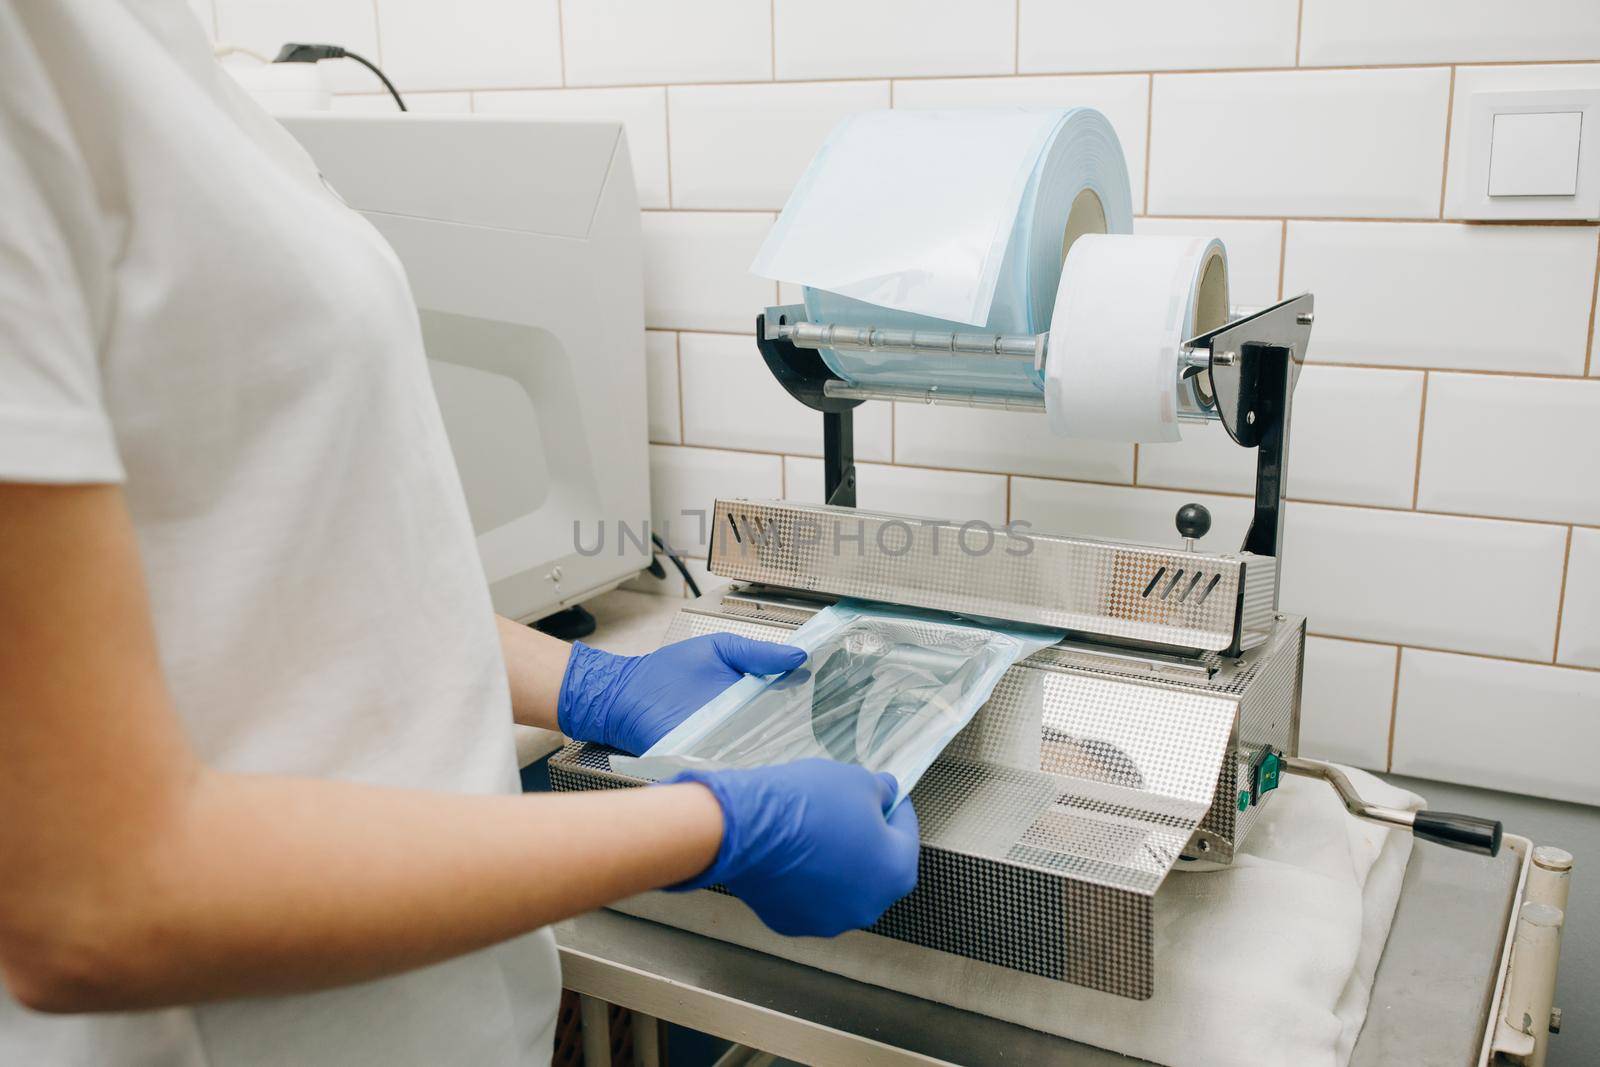 Dentist's assistant hands in gloves packing dental instrument set for autoclaving in a plastic bag using vacuum packing machine. Sterility and safety care concept